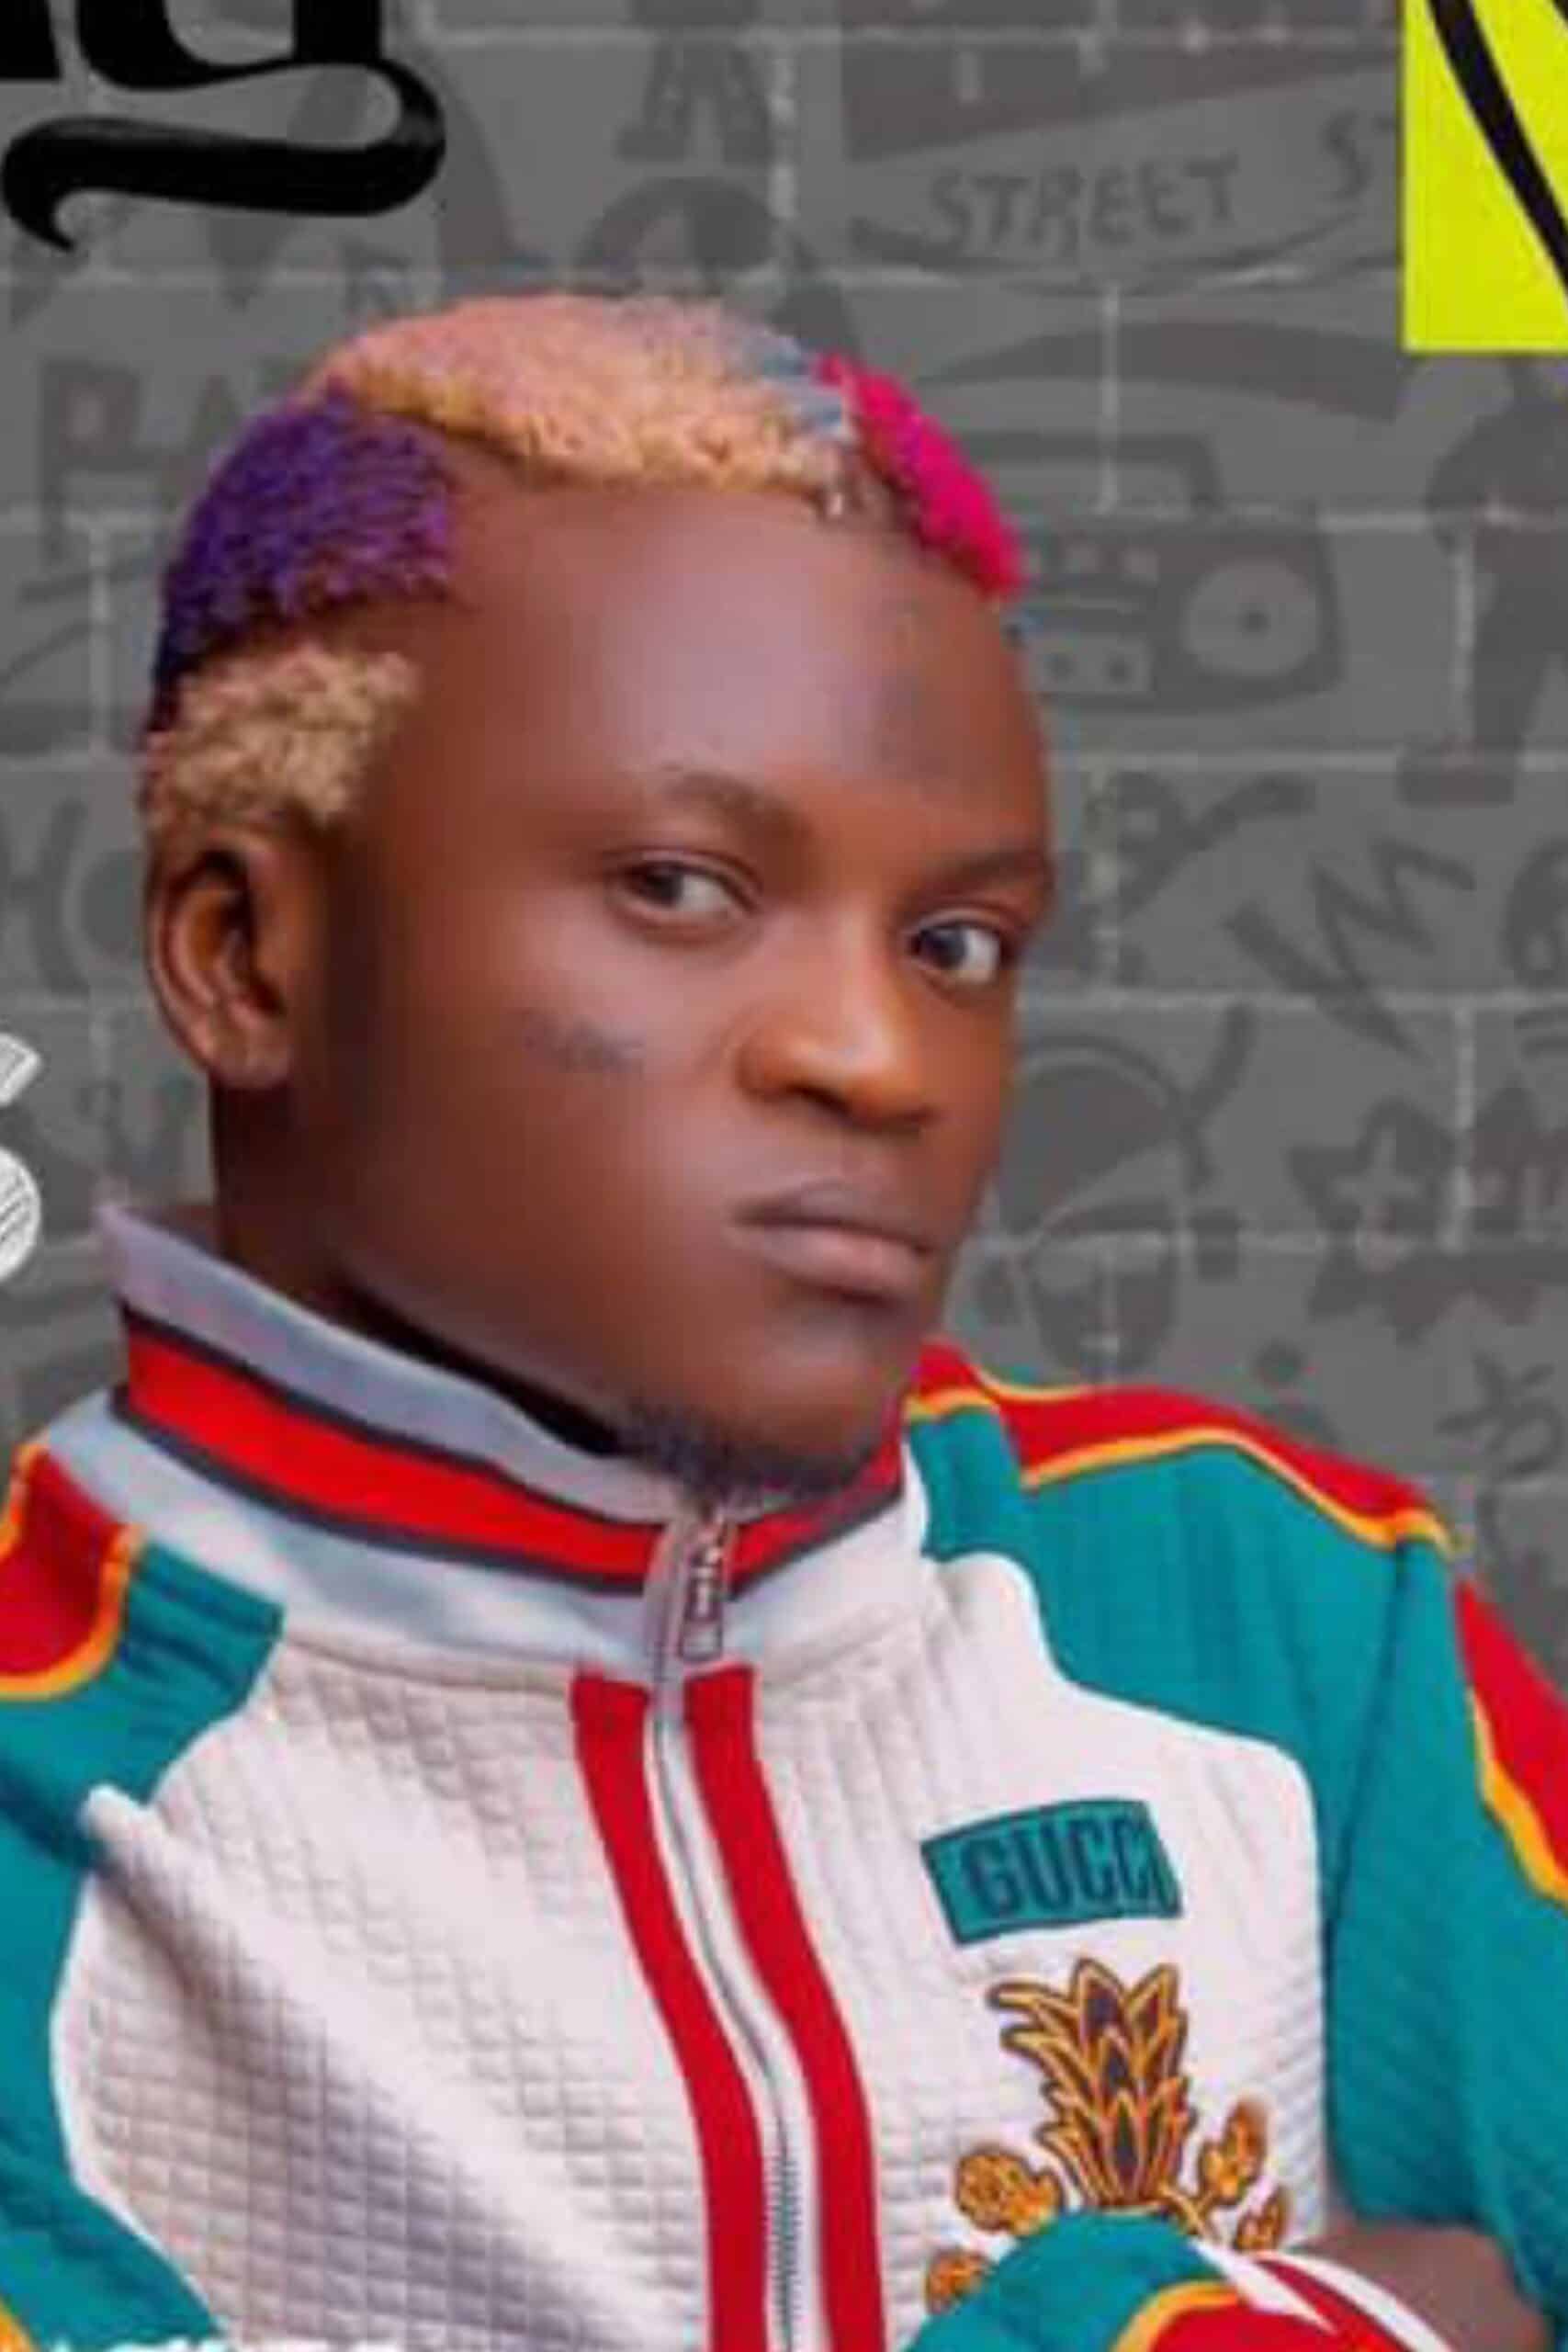 After judging me please pray for me, I want to be perfect like you” Portable tells critics days after welcoming fifth child